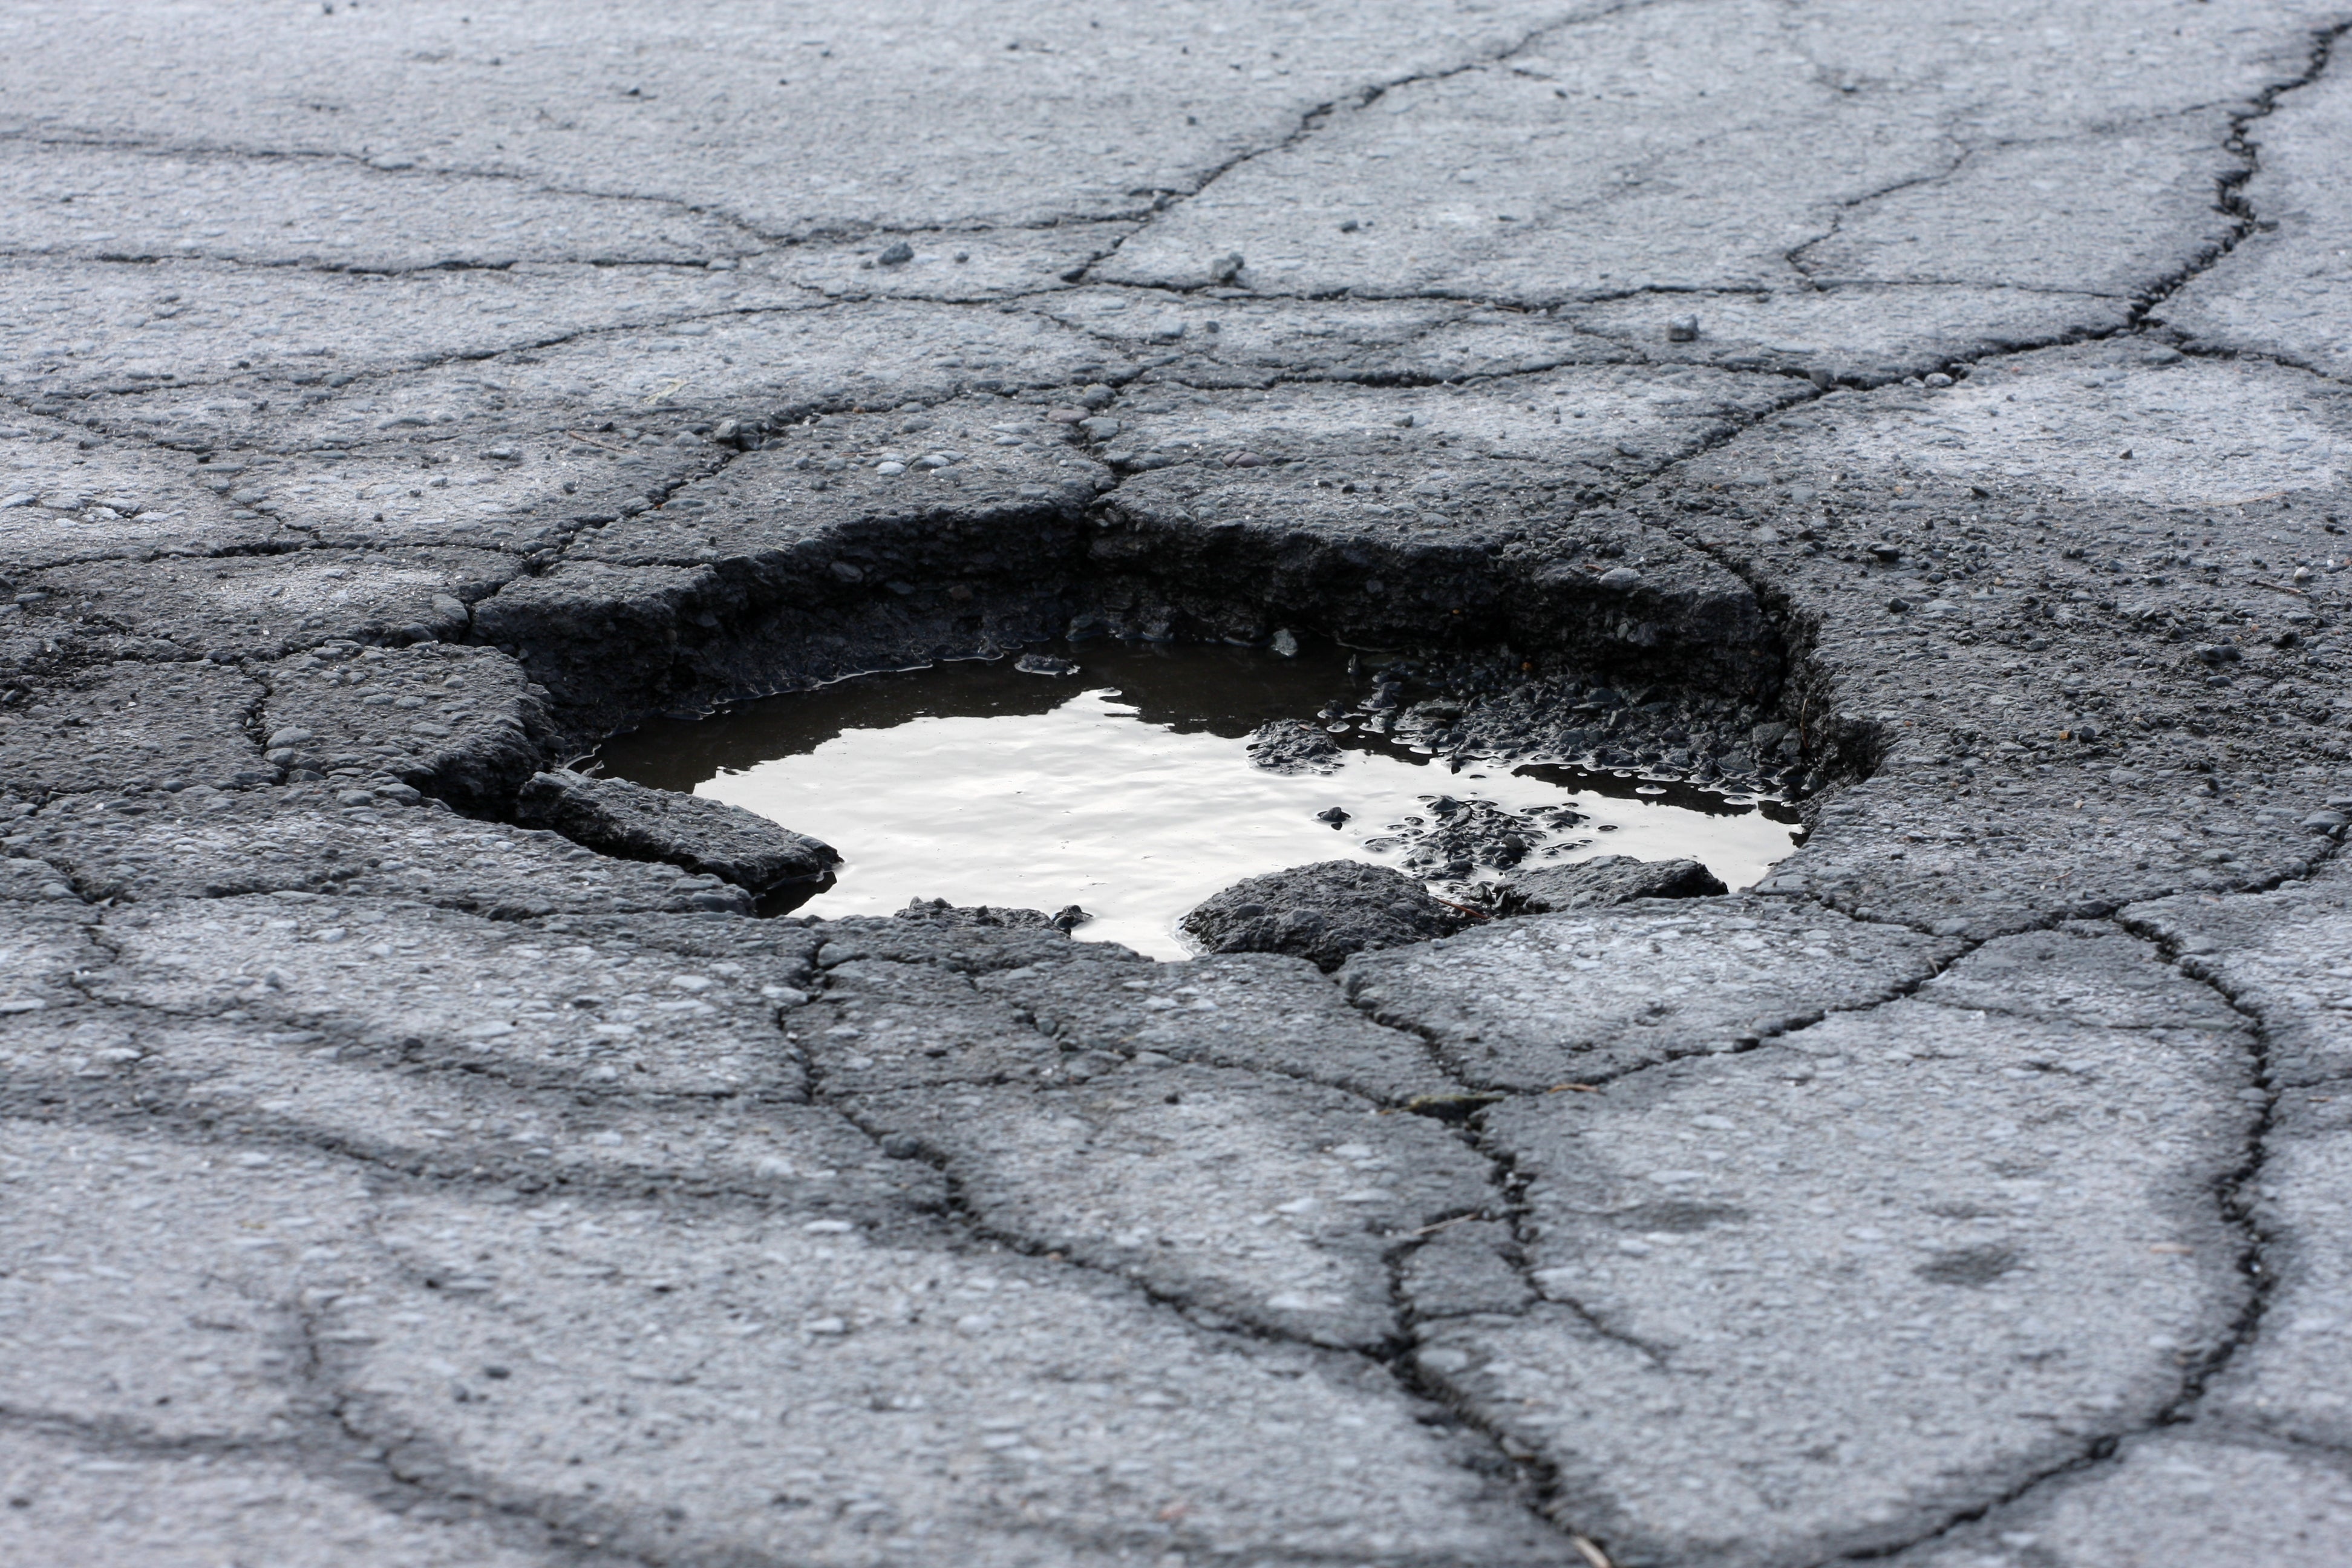 Fixing potholes, Sunak said, is what people really care about